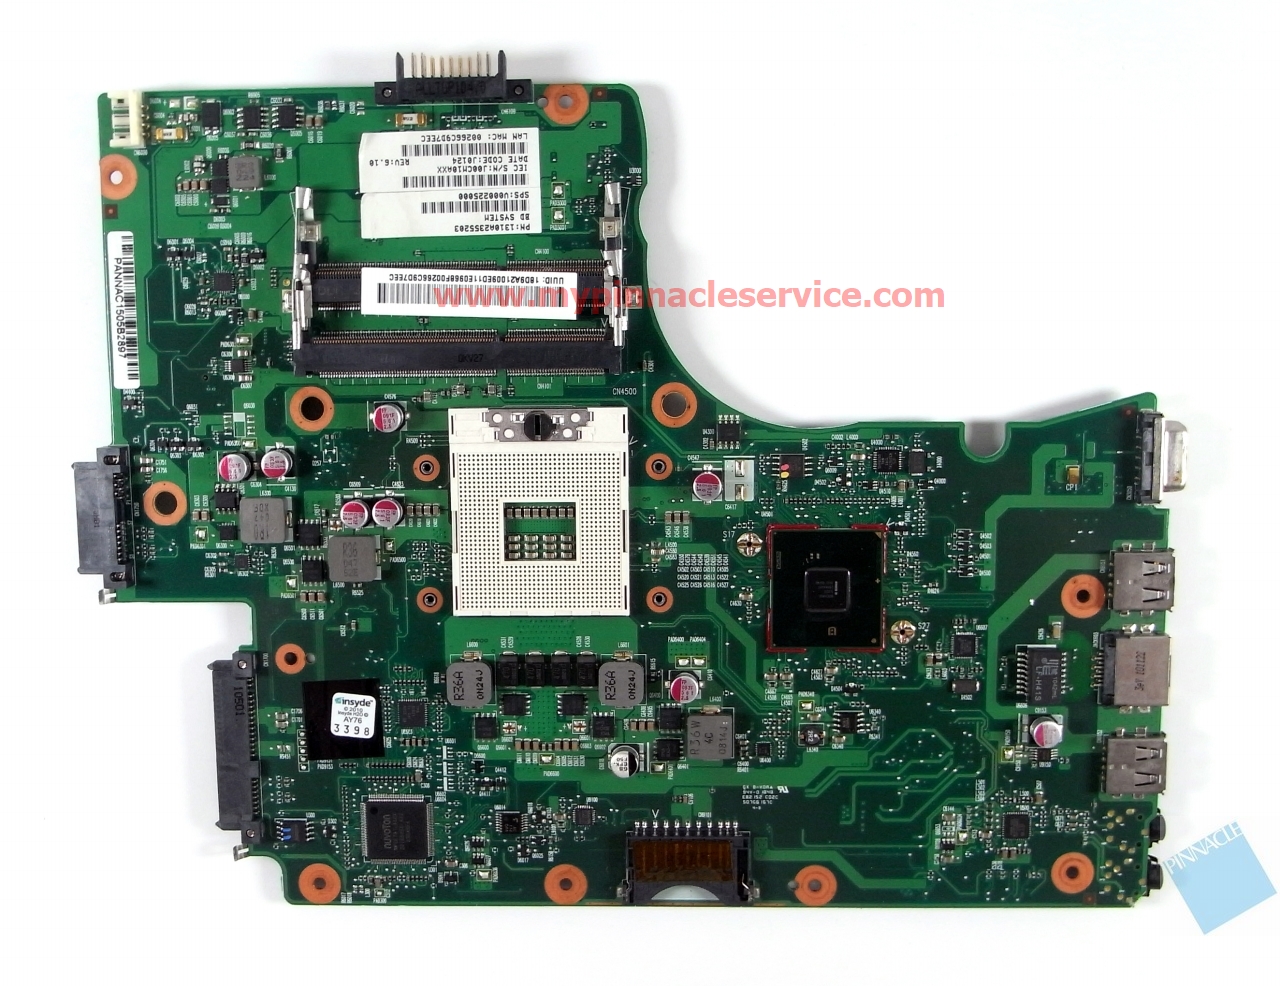 v000225000-motherboard-for-toshiba-satellite-c650-c655-6050a2355202-1310a2355203-r0011257.jpg